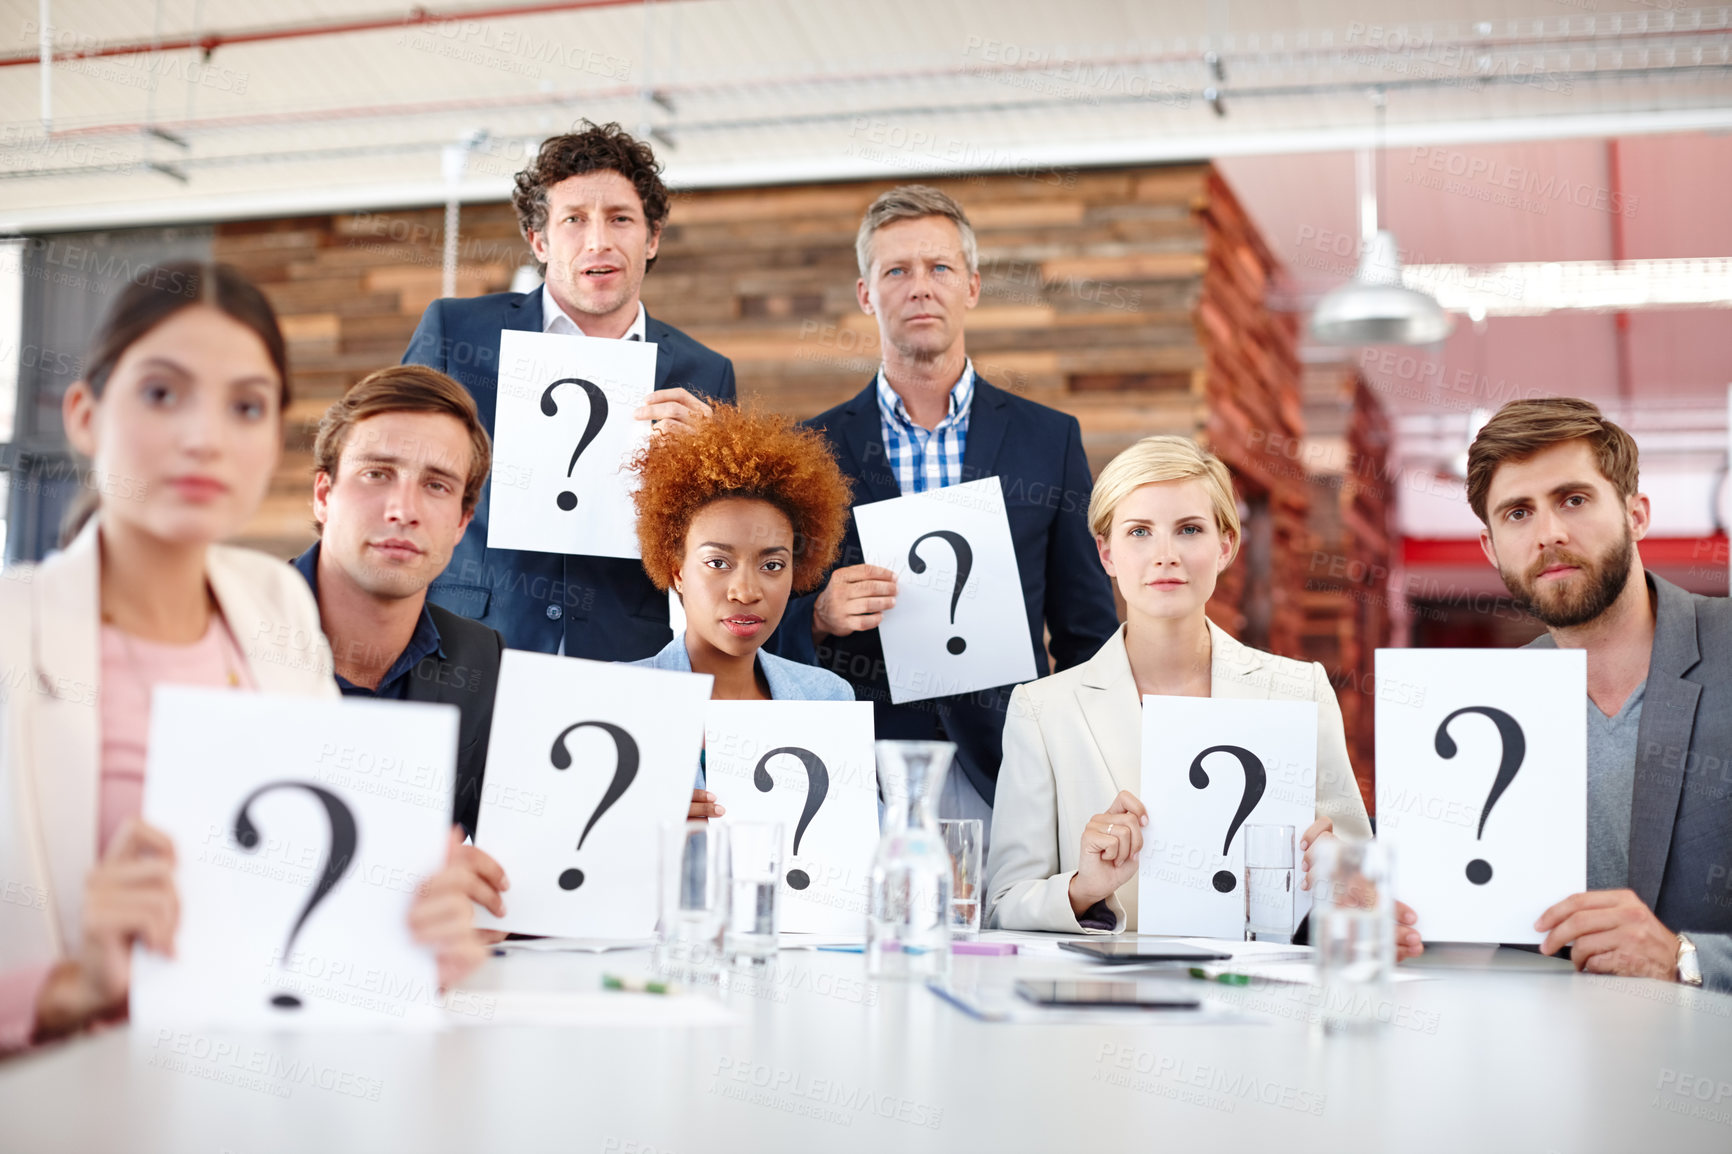 Buy stock photo Portrait of a group of businesspeople holding up cards with question marks on them